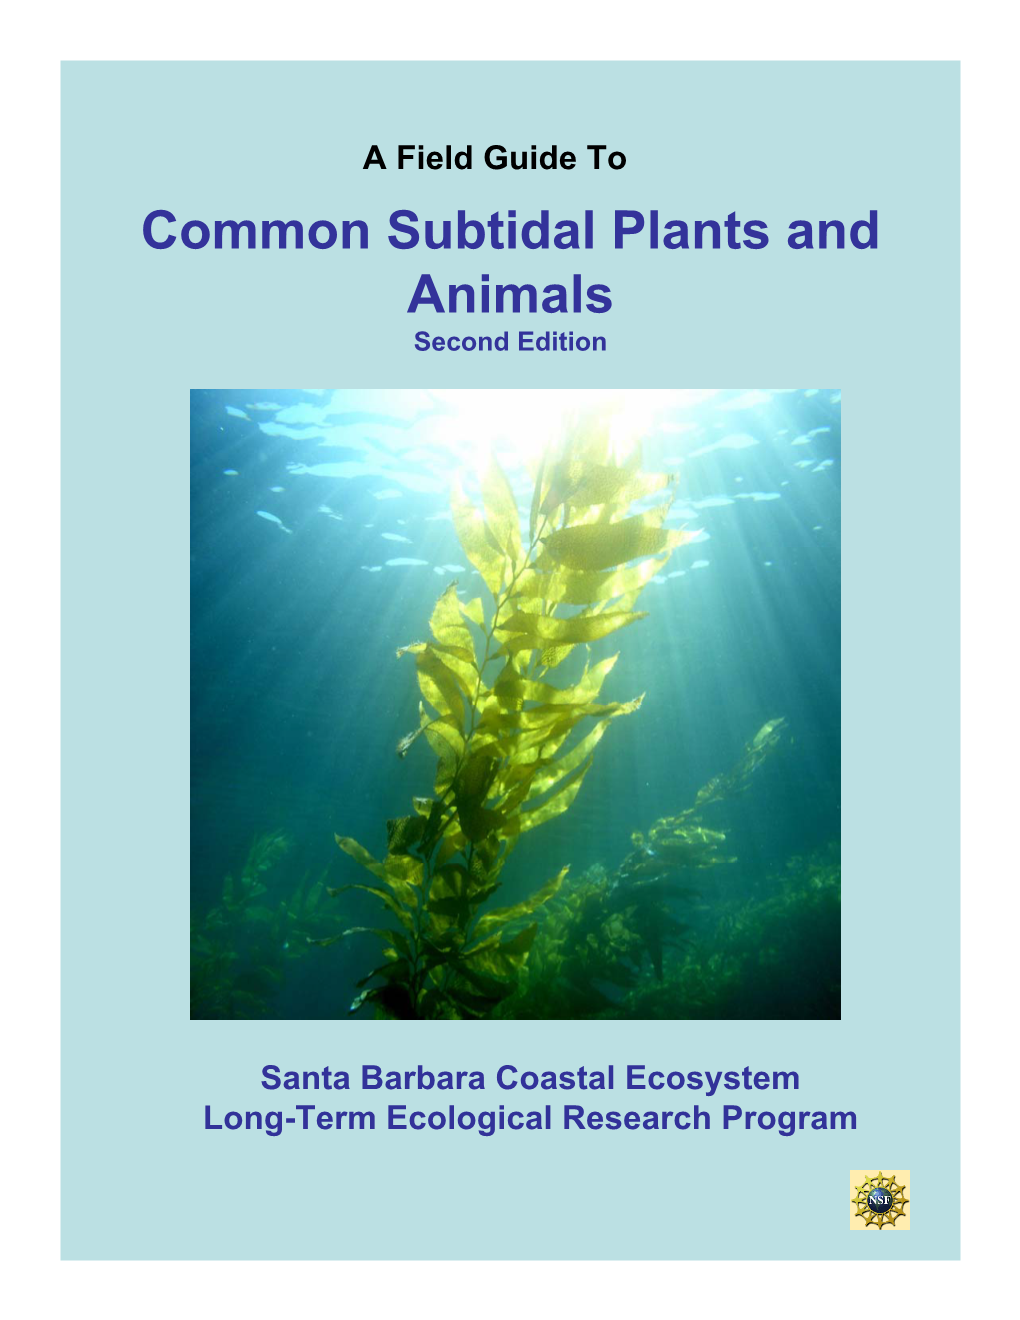 Common Subtidal Plants and Animals Second Edition